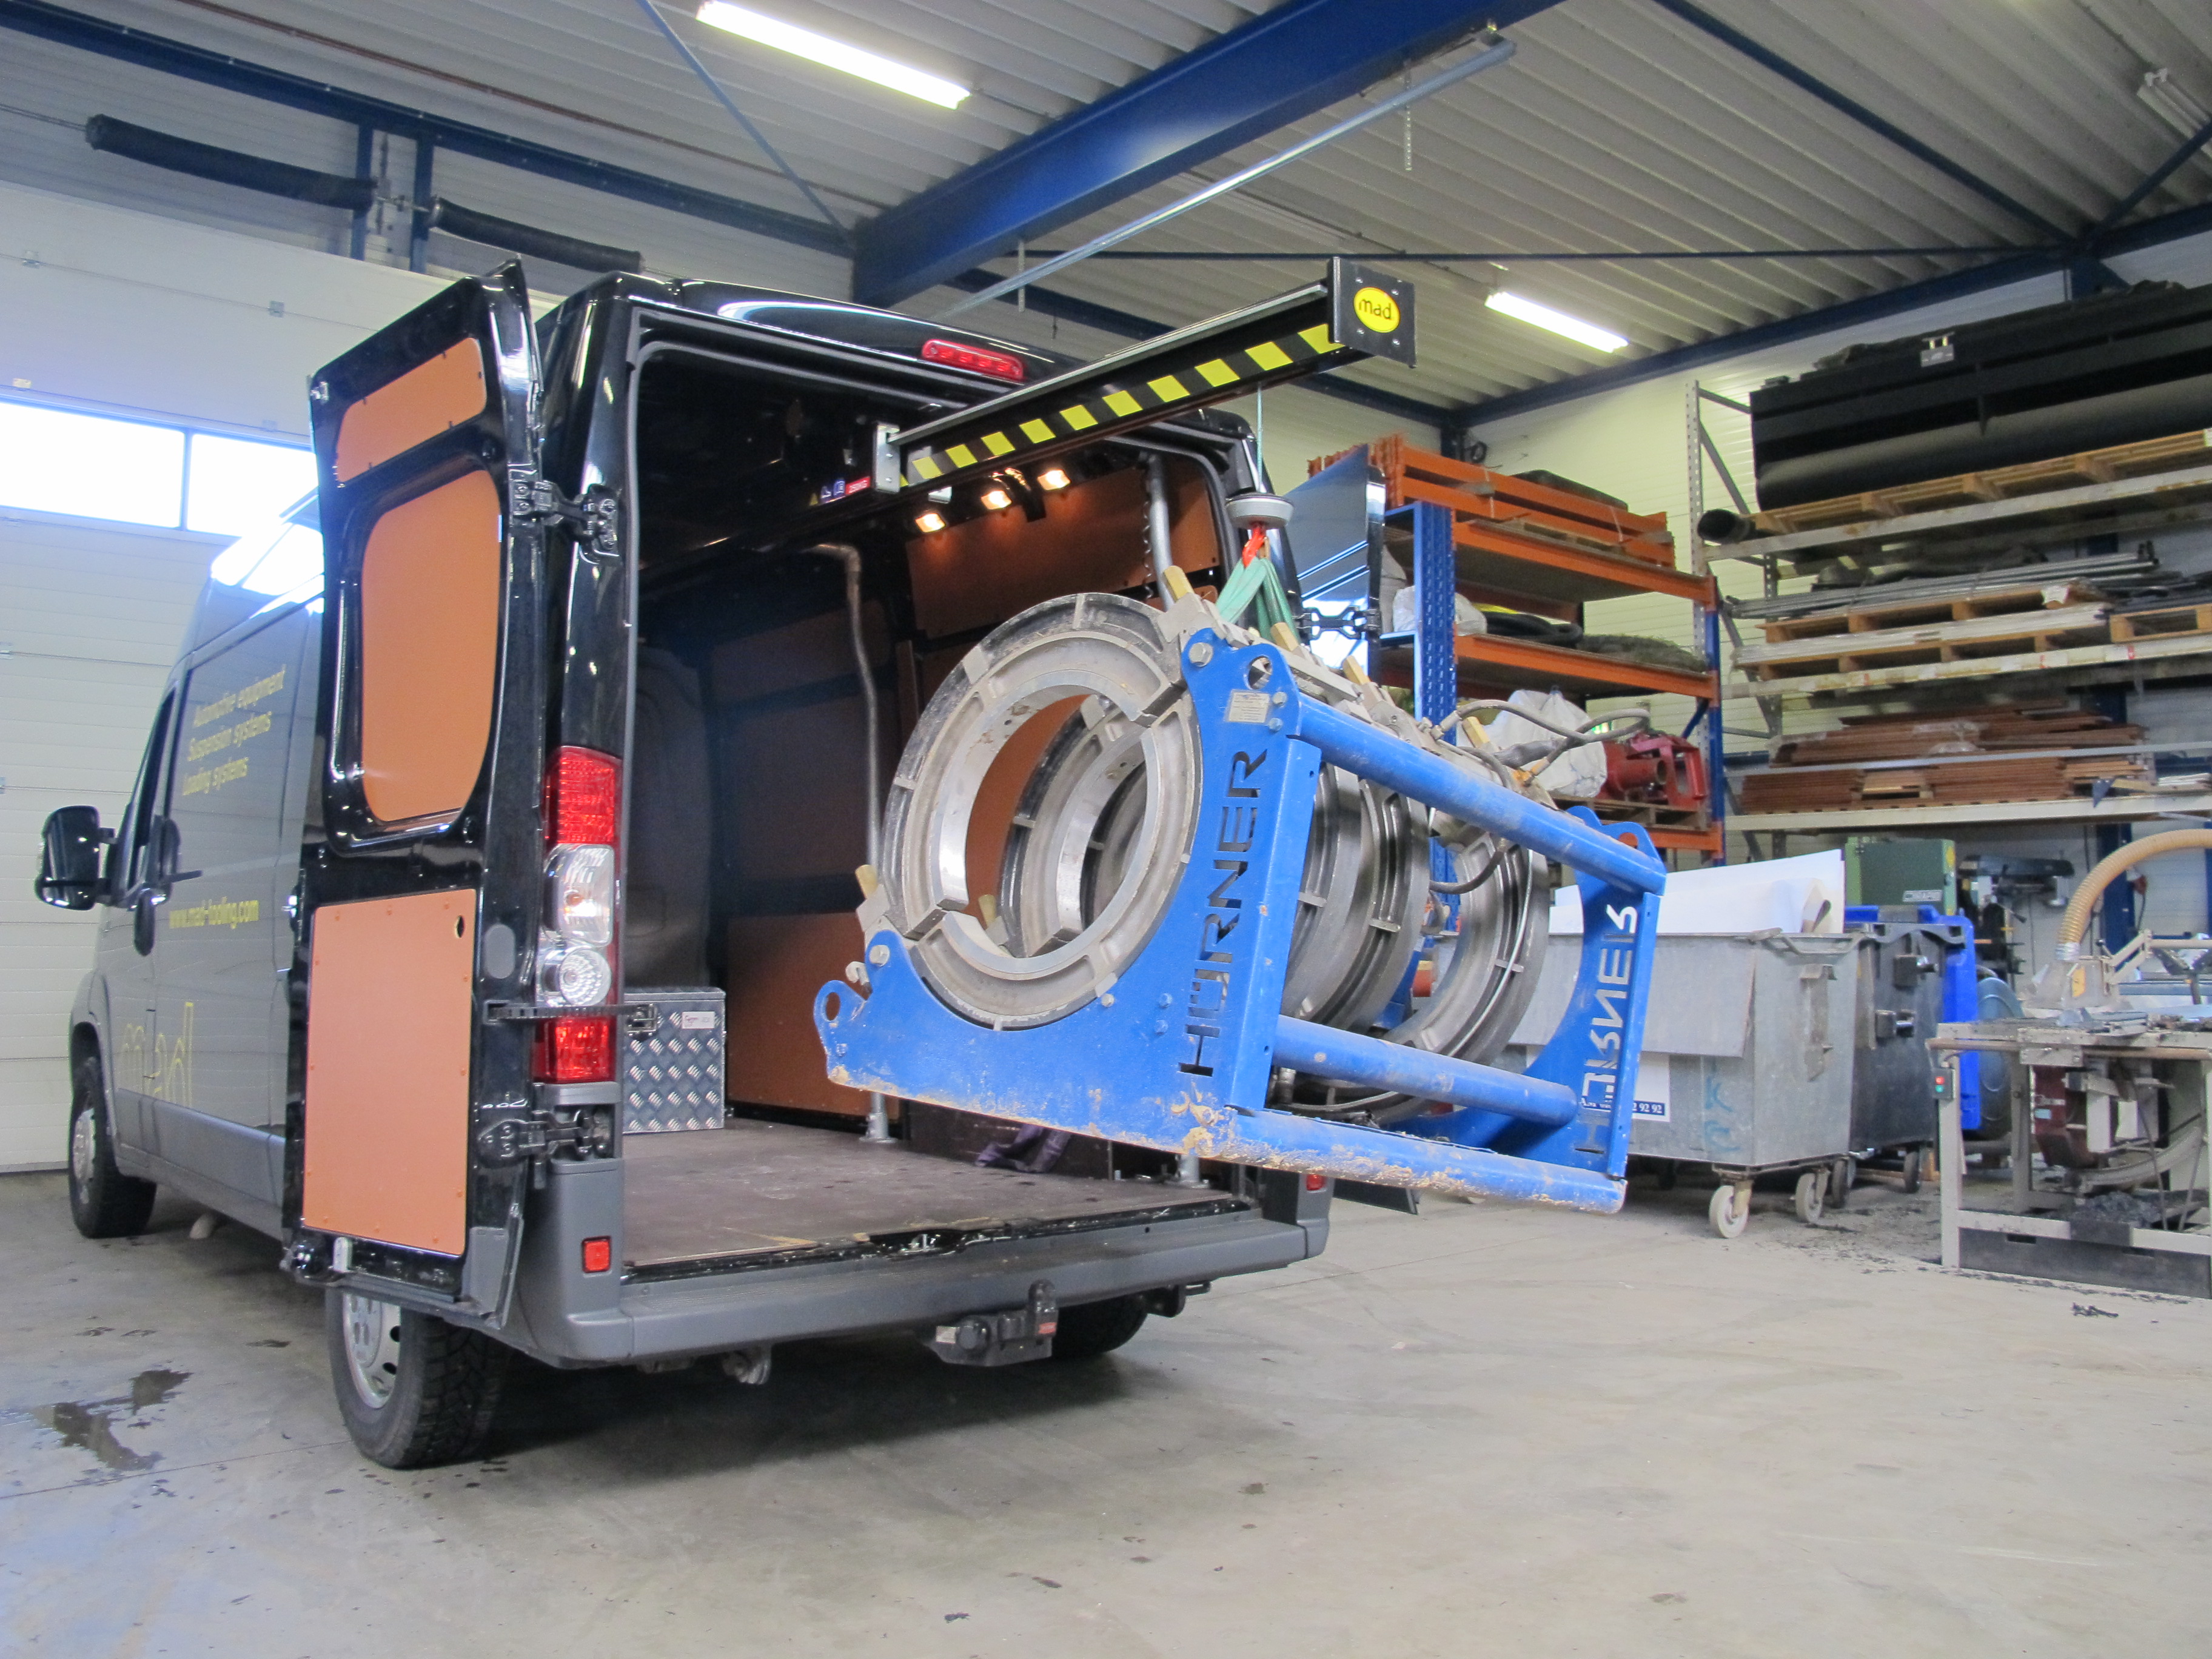 MAD EasyLoad Crane for lifting, handling and loading industrial equipment into van